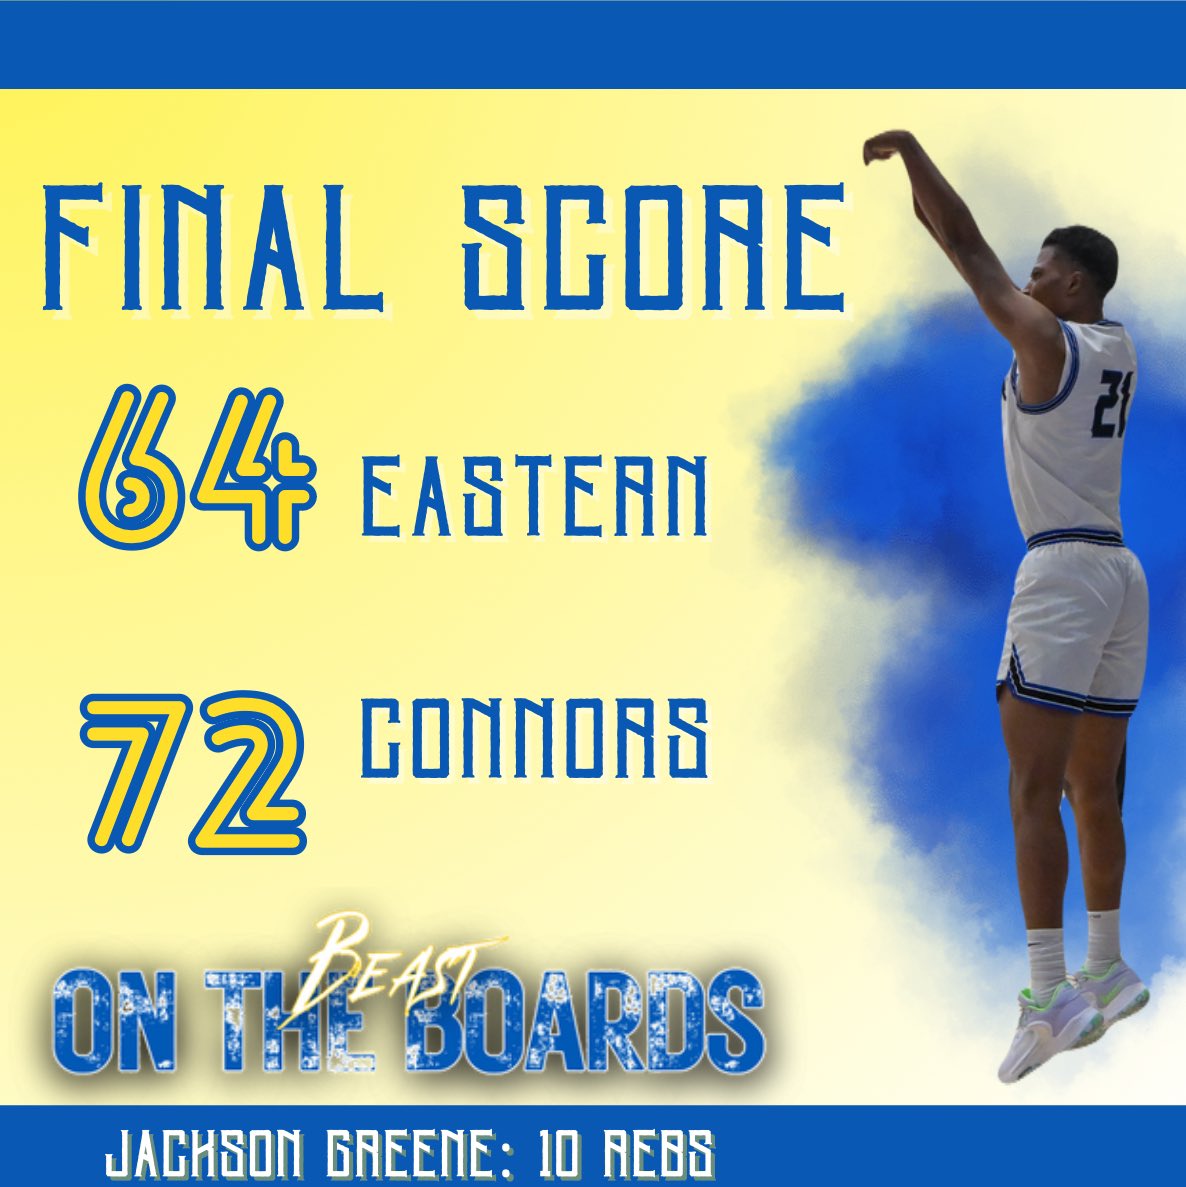 🏀Game Update🏀 In a closely contested battle against Connors, we came up short with a final score of 64-82. 🤝 Jackson Greene earns the final ‘Beast on the Boards Award' team-high of 10 rebounds! 🏀